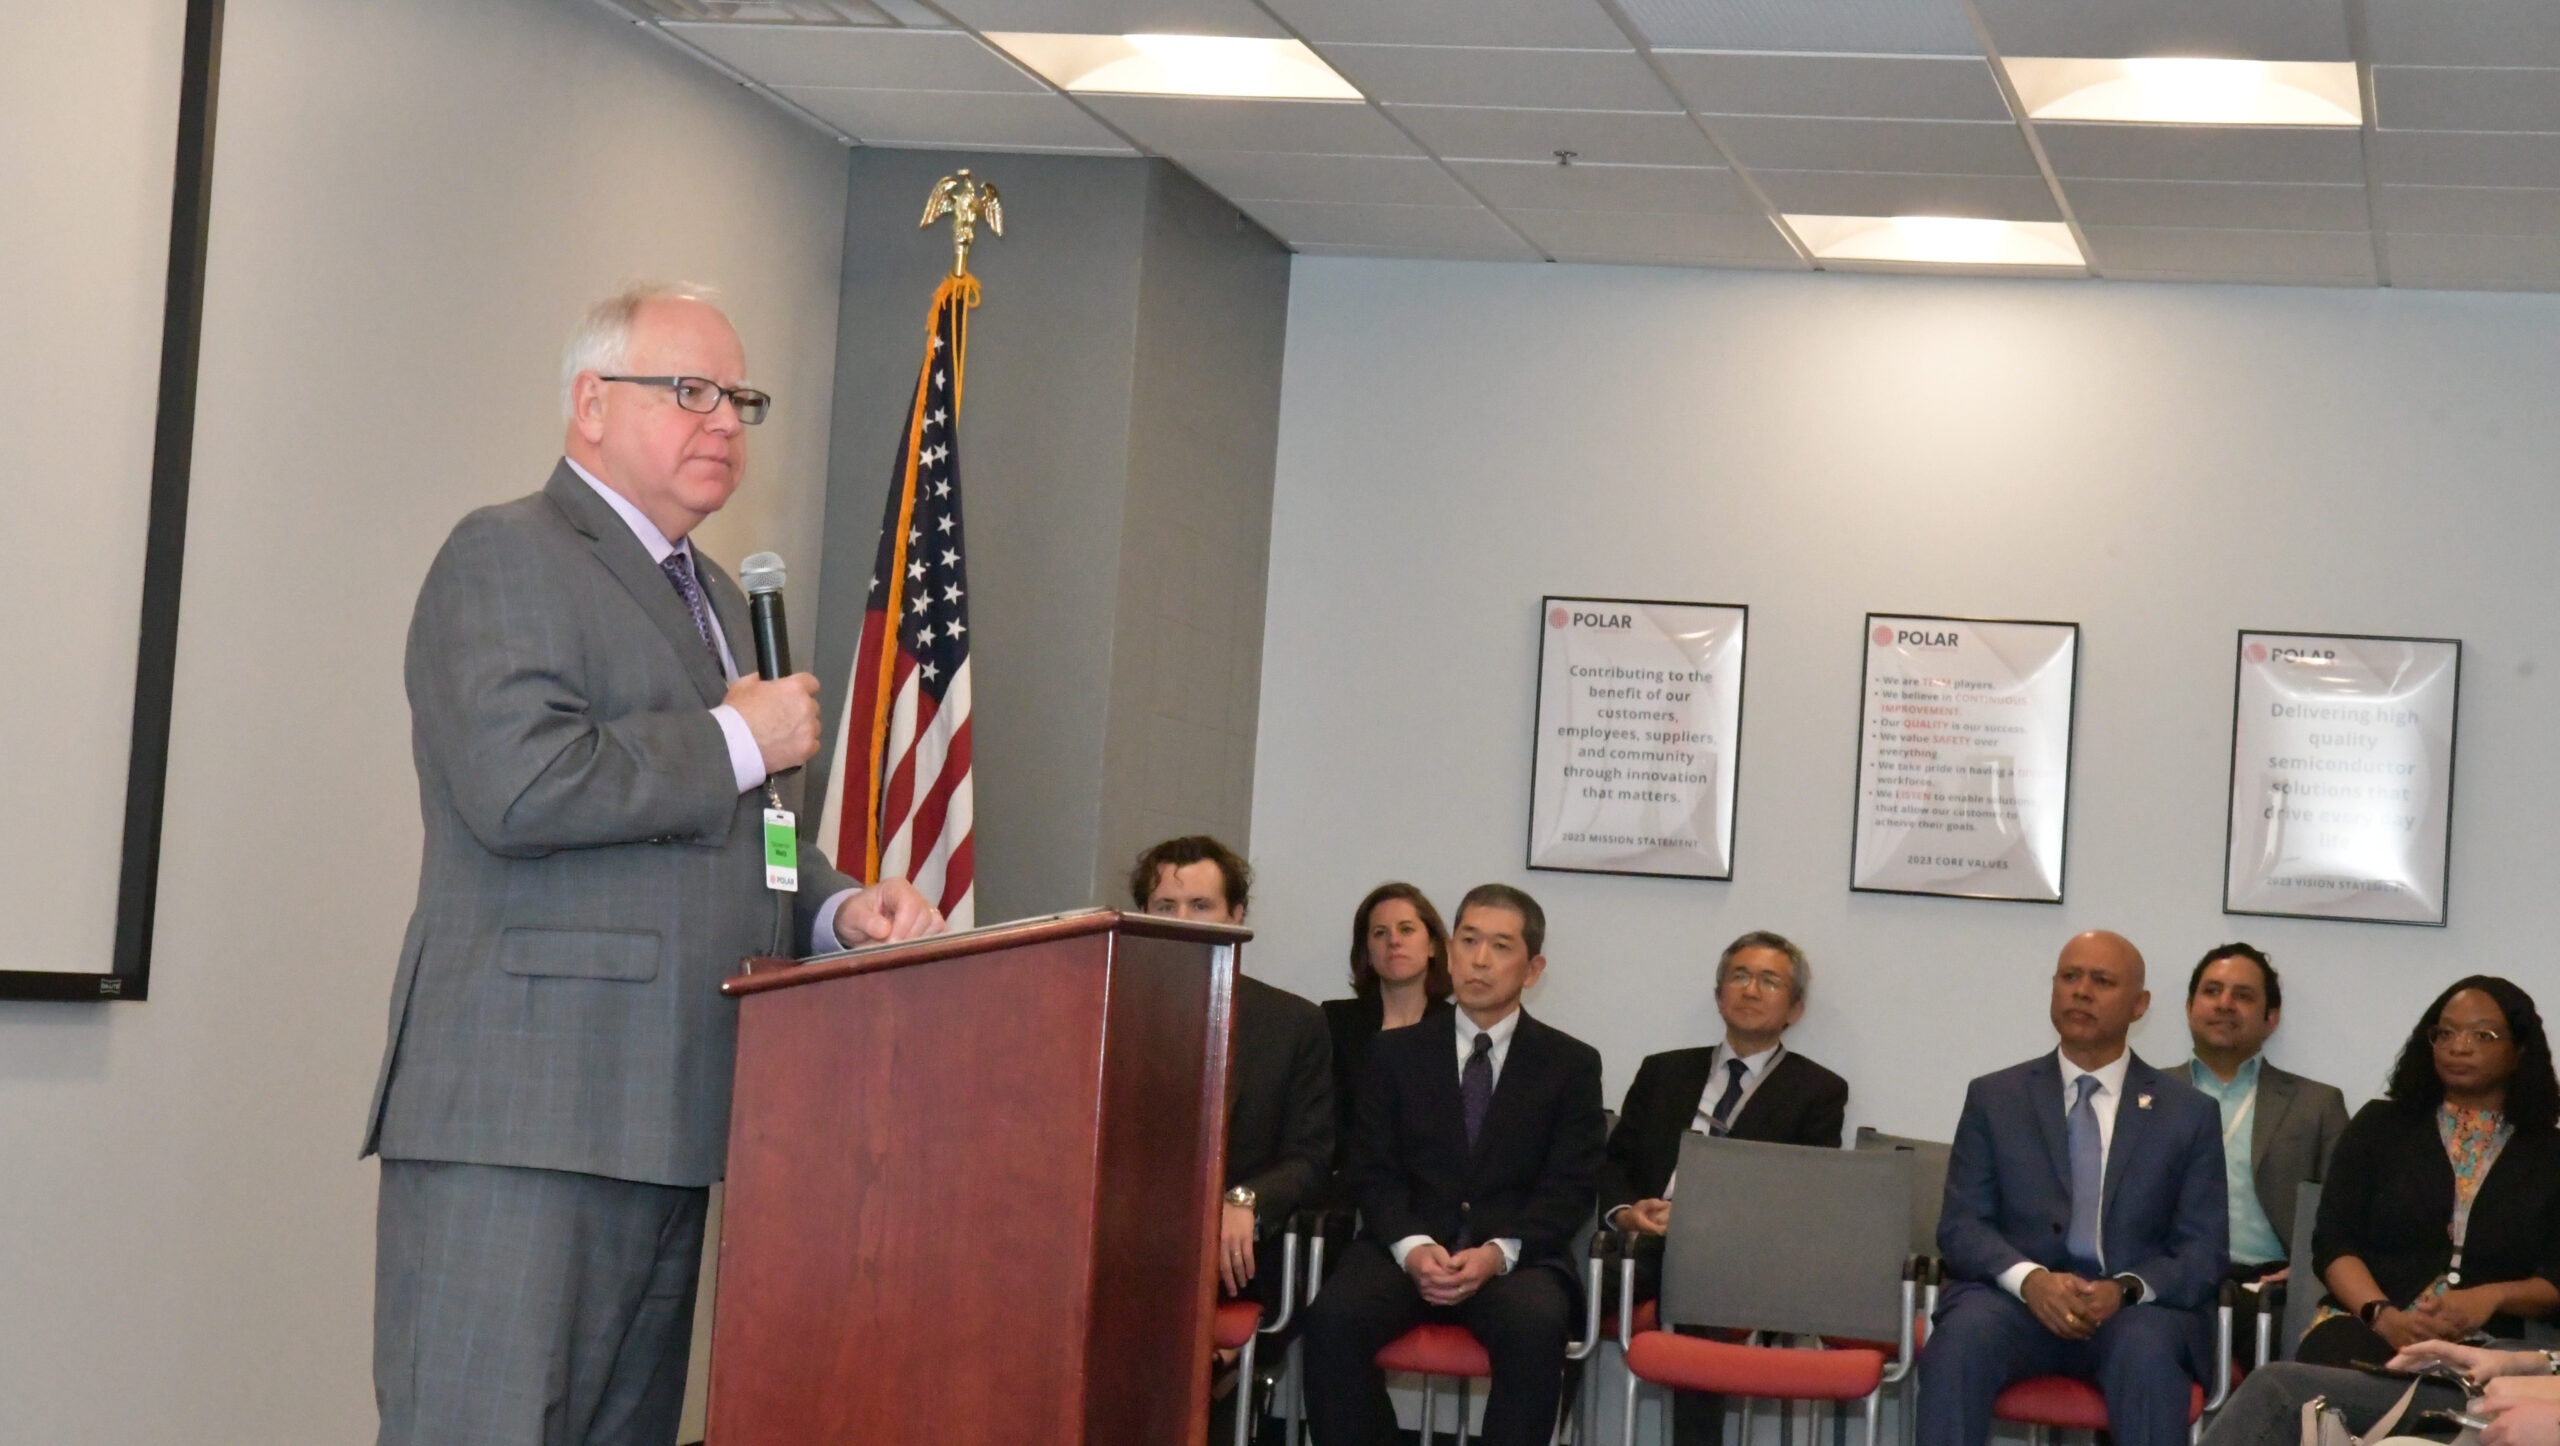 Governor Tim Walz addressing a crowd at Polar Semiconductor in Bloomington during a recent FOA event